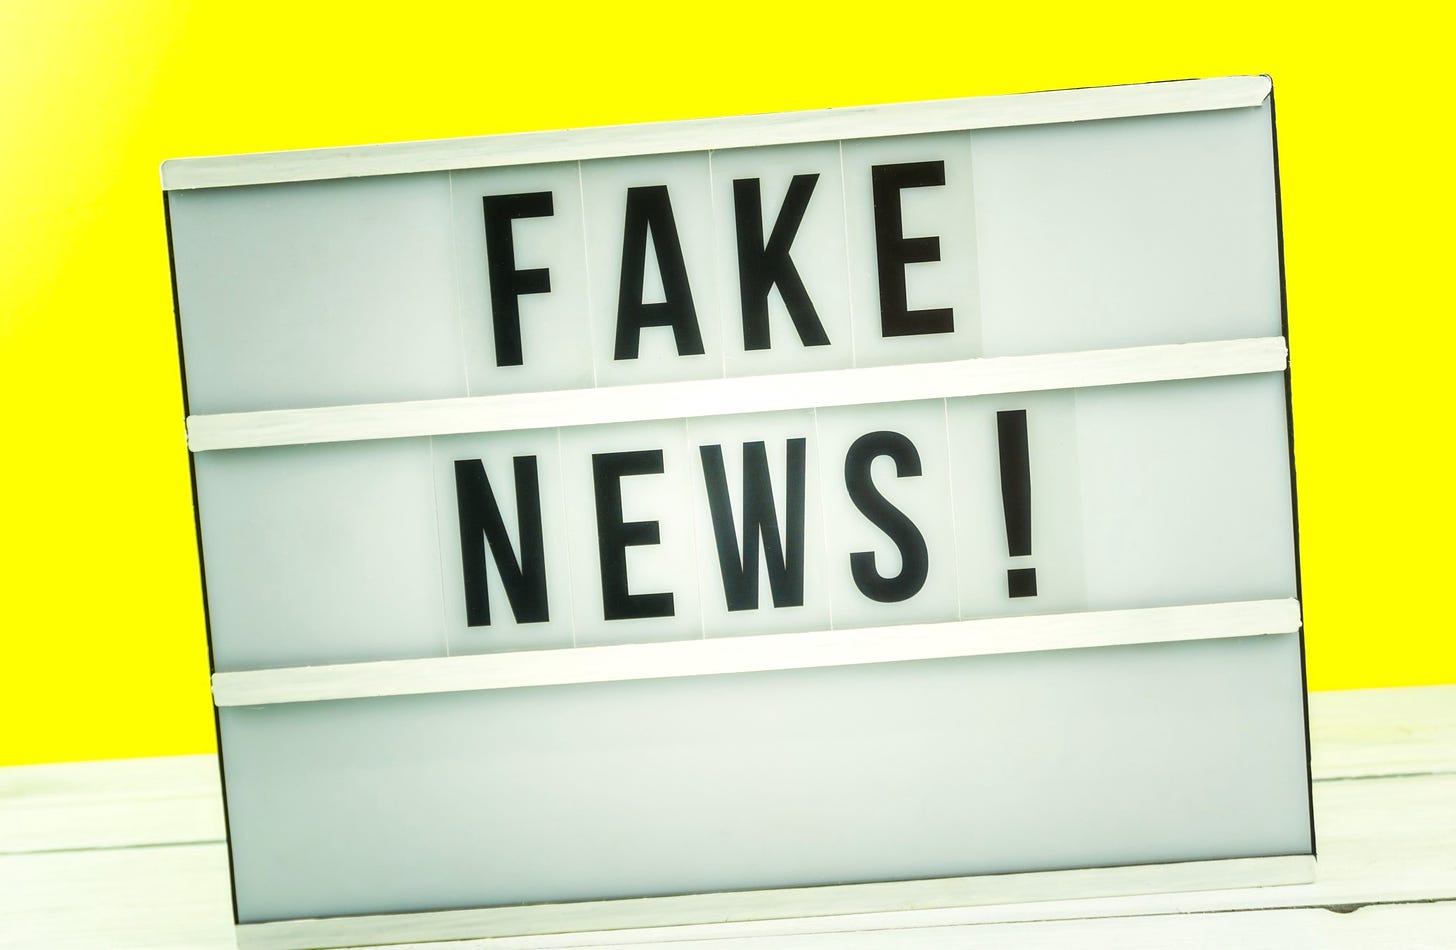 A “fake news” sign sits against a wall of yellow.